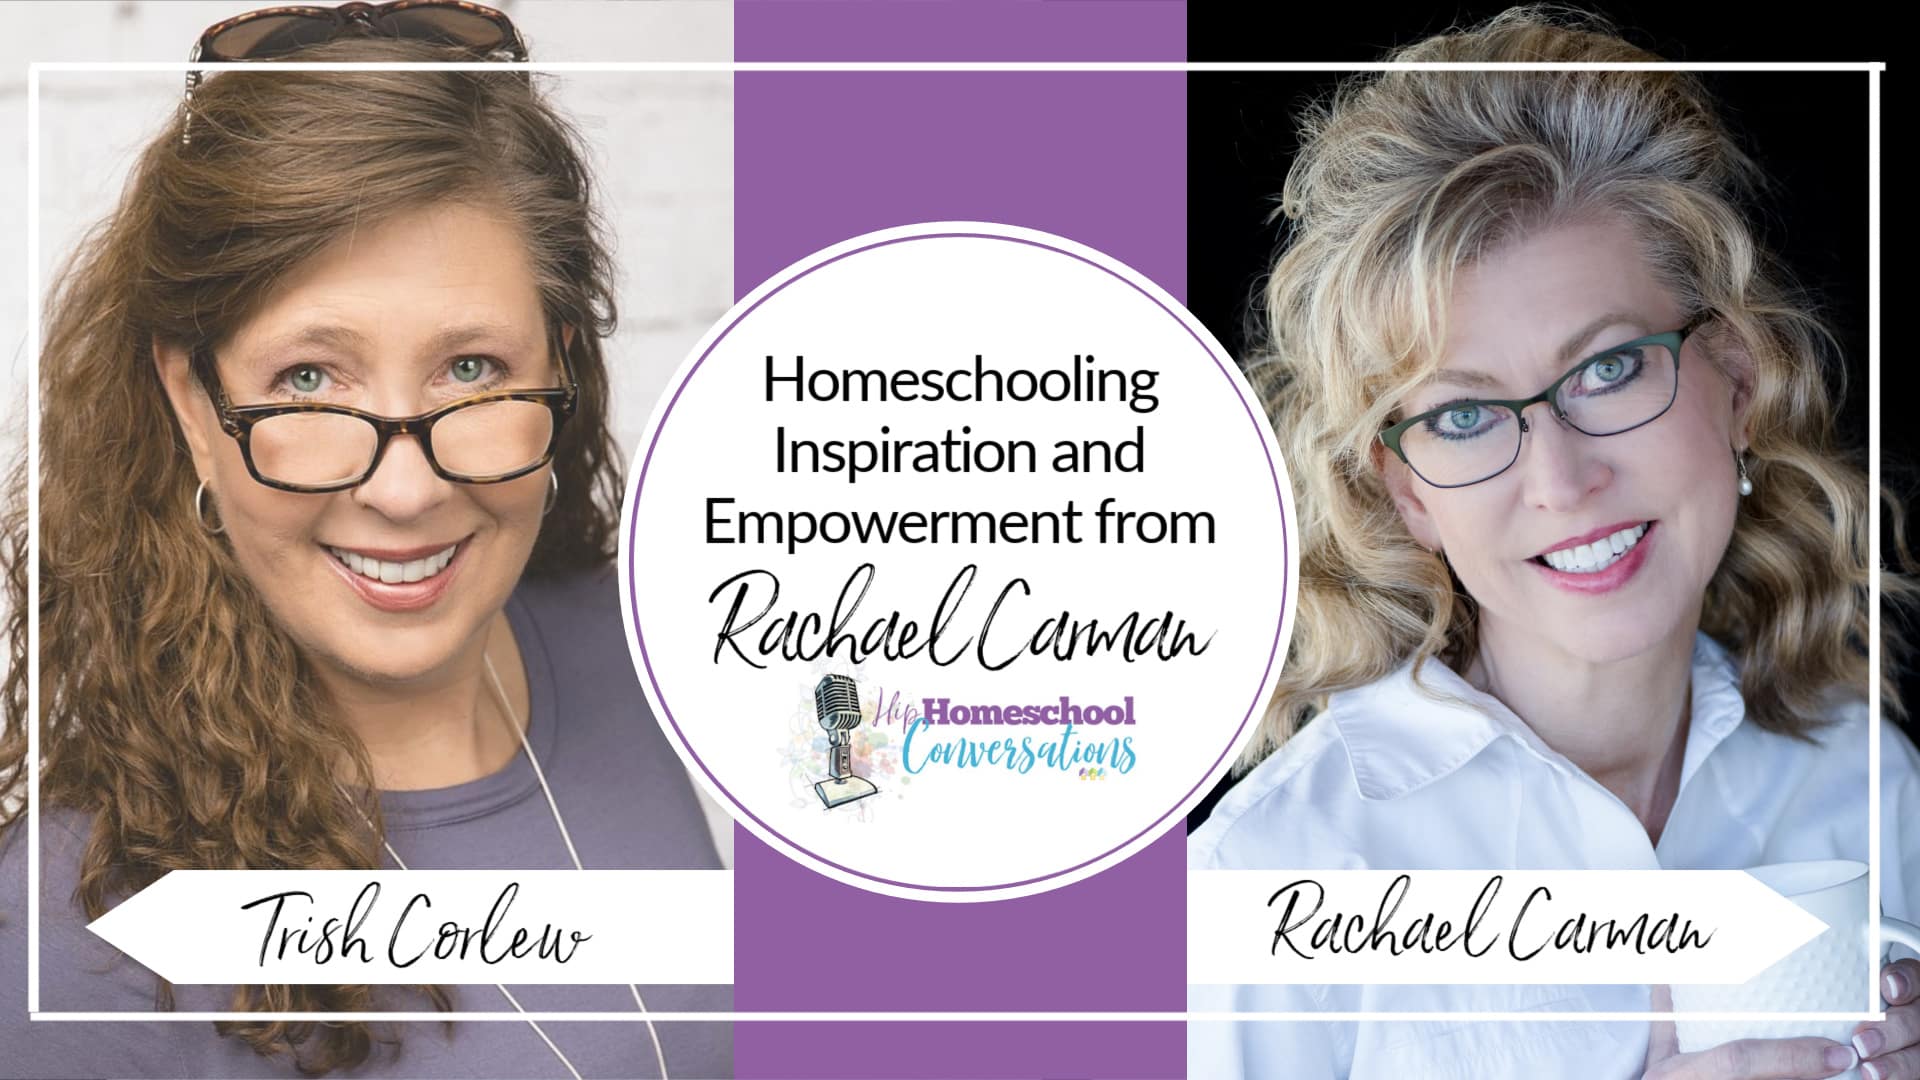 If you have ever felt inadequate to homeschool or just uninterested, join Trish as she interviews Rachael Carman. They discuss everything from butterflies to the Bible to give Homeschooling Inspiration and Empowerment.